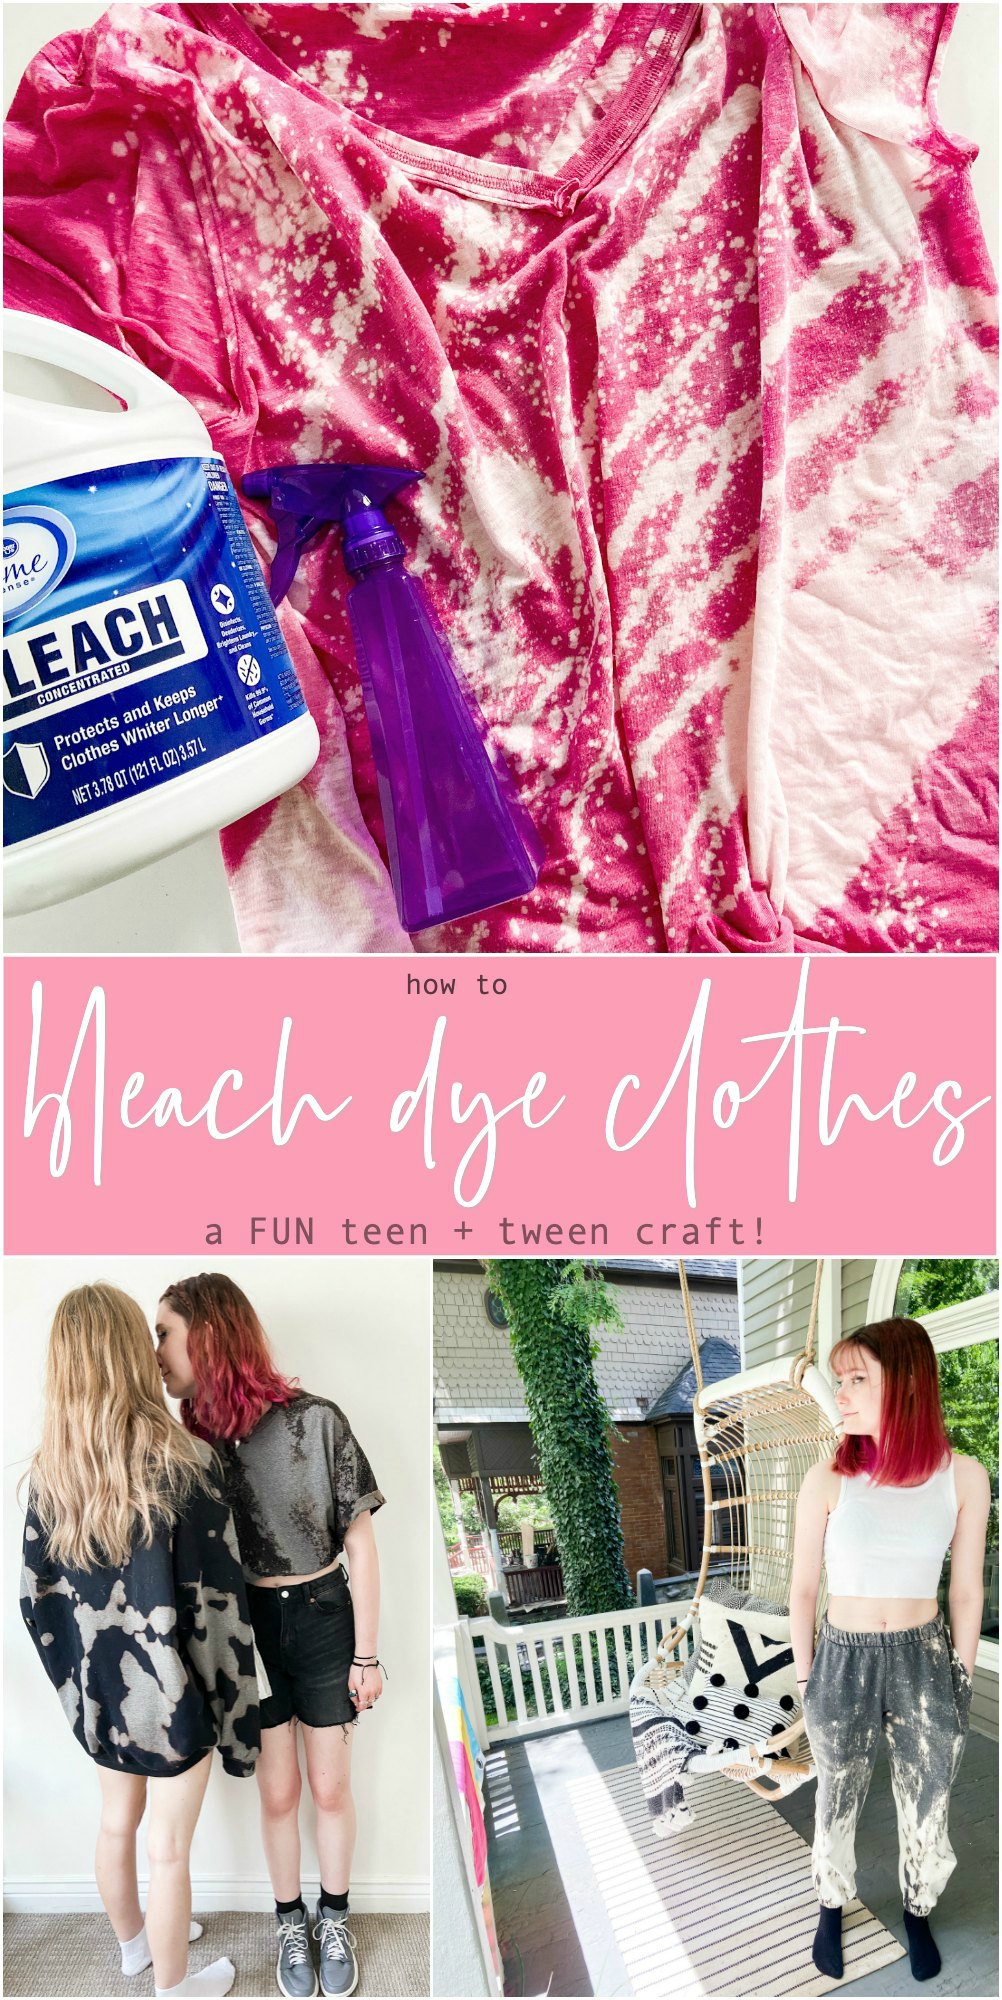 How to Bleach Dye Clothes - a FUN teen or tween craft. Bleach Dying clothes is a fun summer craft. All you need is bleach to give old clothes a brand new look! 